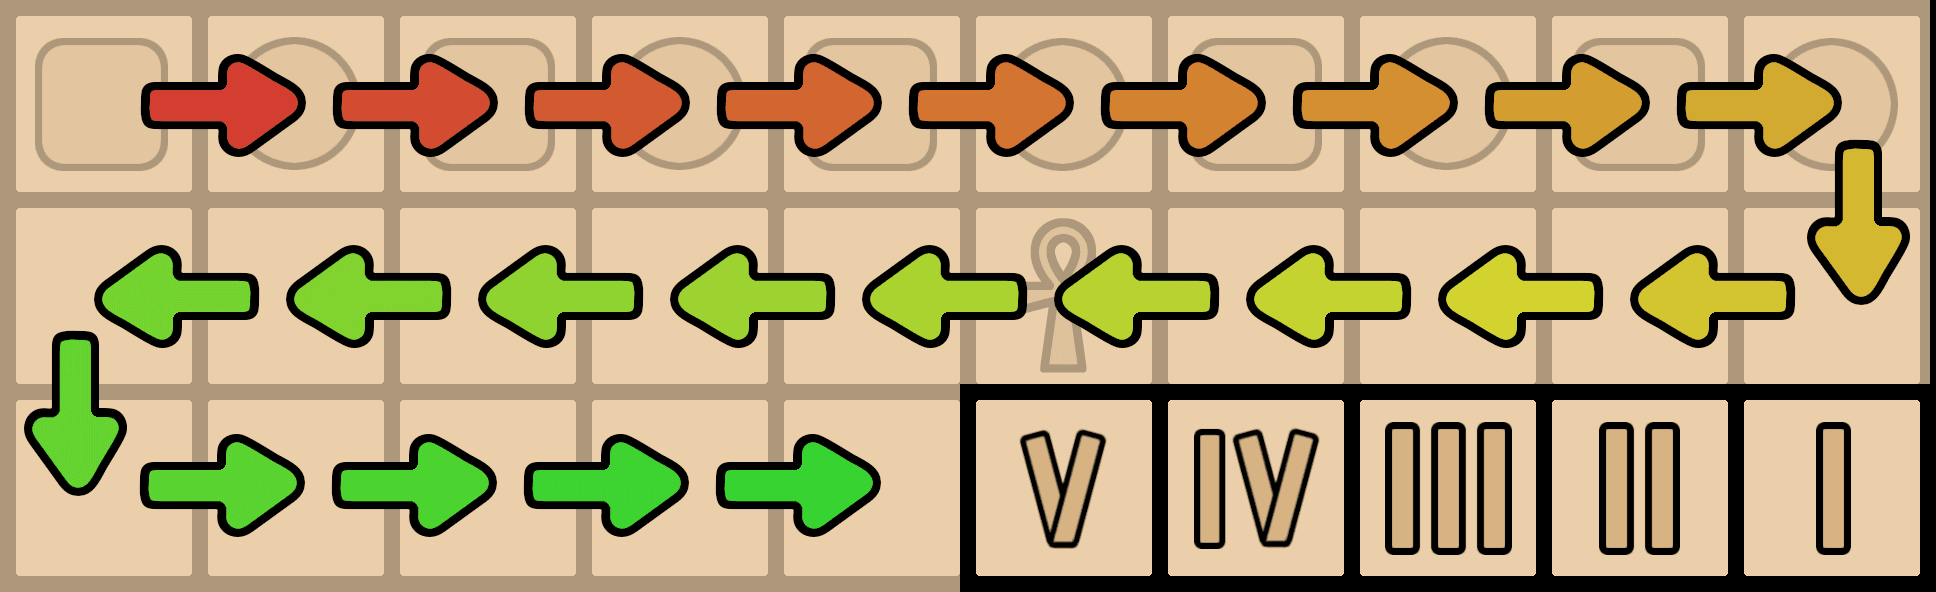 A Senet board with the path along the board shown, with the special end tiles highlighted